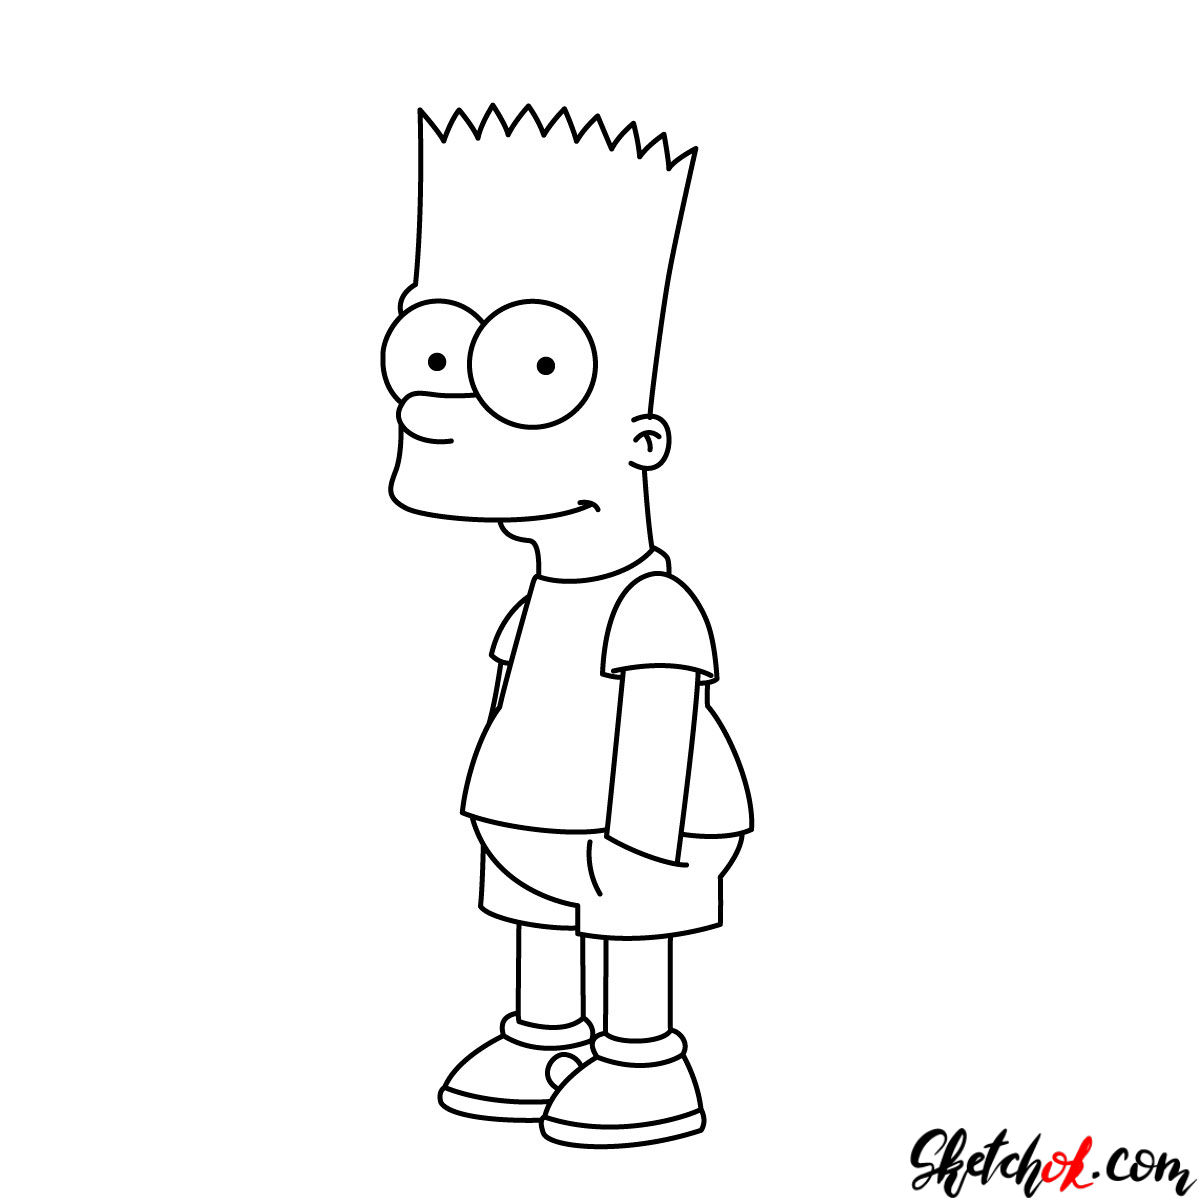 How to draw Bart Simpson - step 10